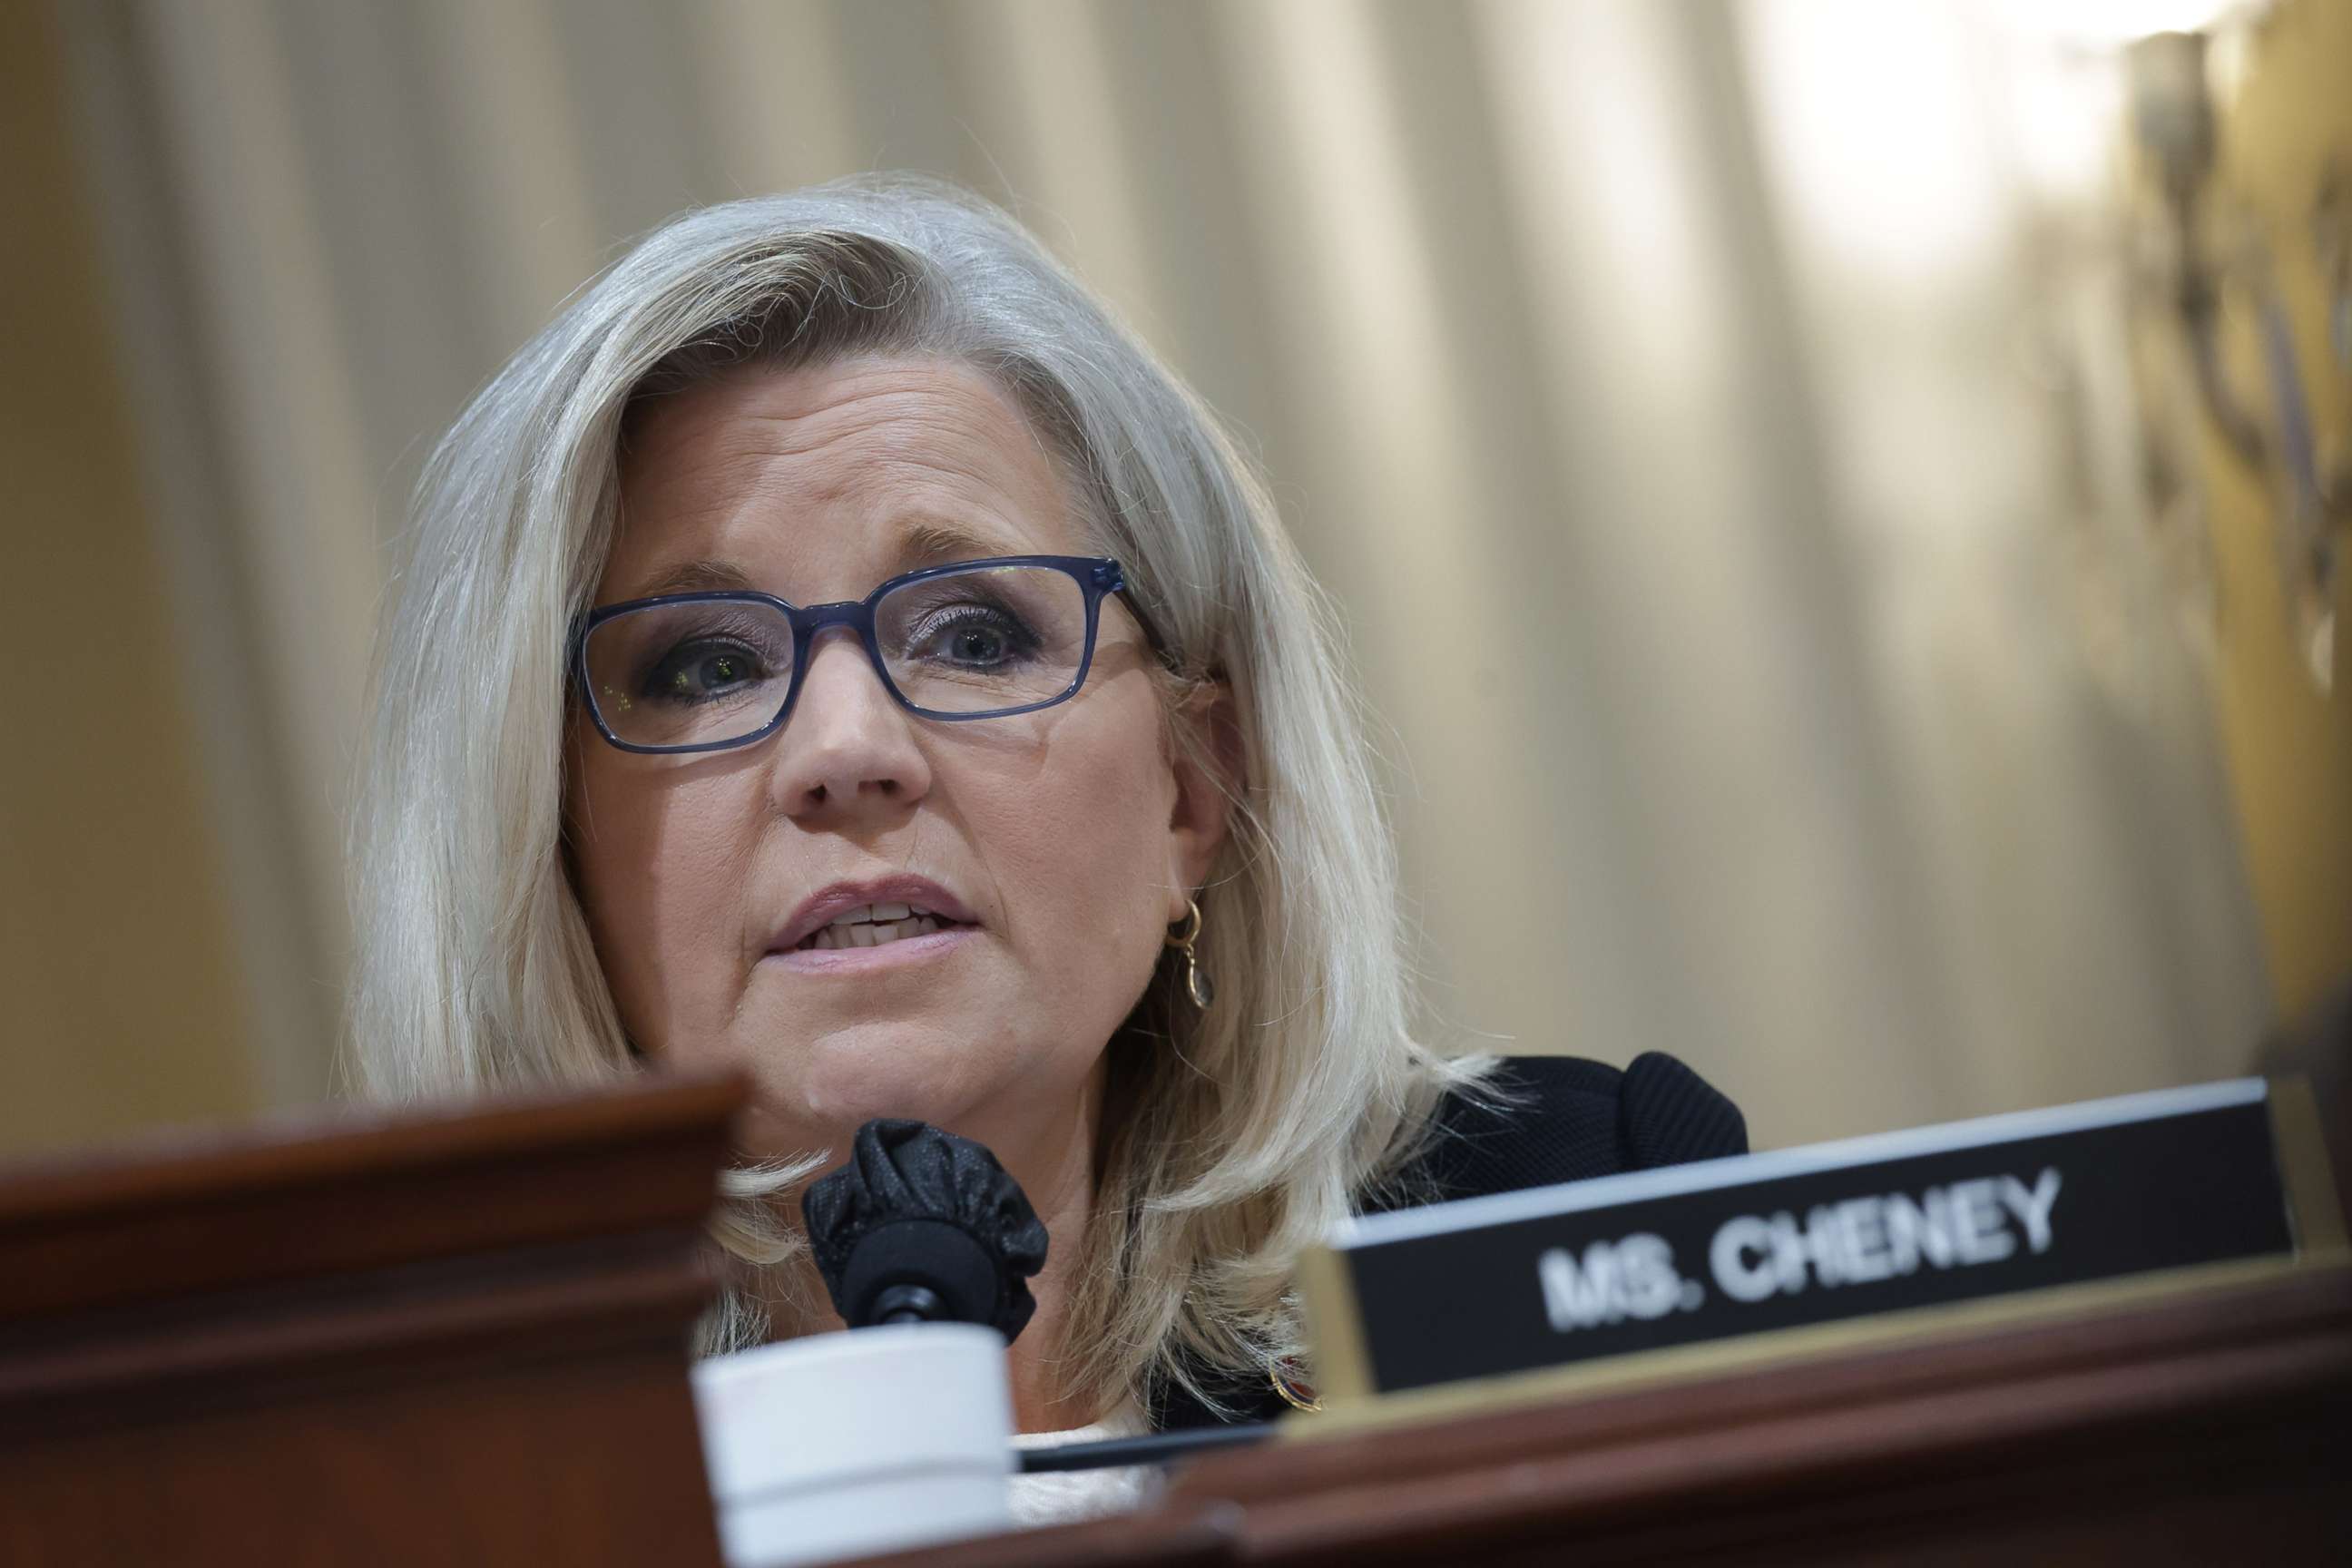 PHOTO: Rep. Liz Cheney, Vice Chairwoman of the Select Committee to Investigate the January 6th Attack on the U.S. Capitol, delivers remarks during a hearing in Washington, July 12, 2022.